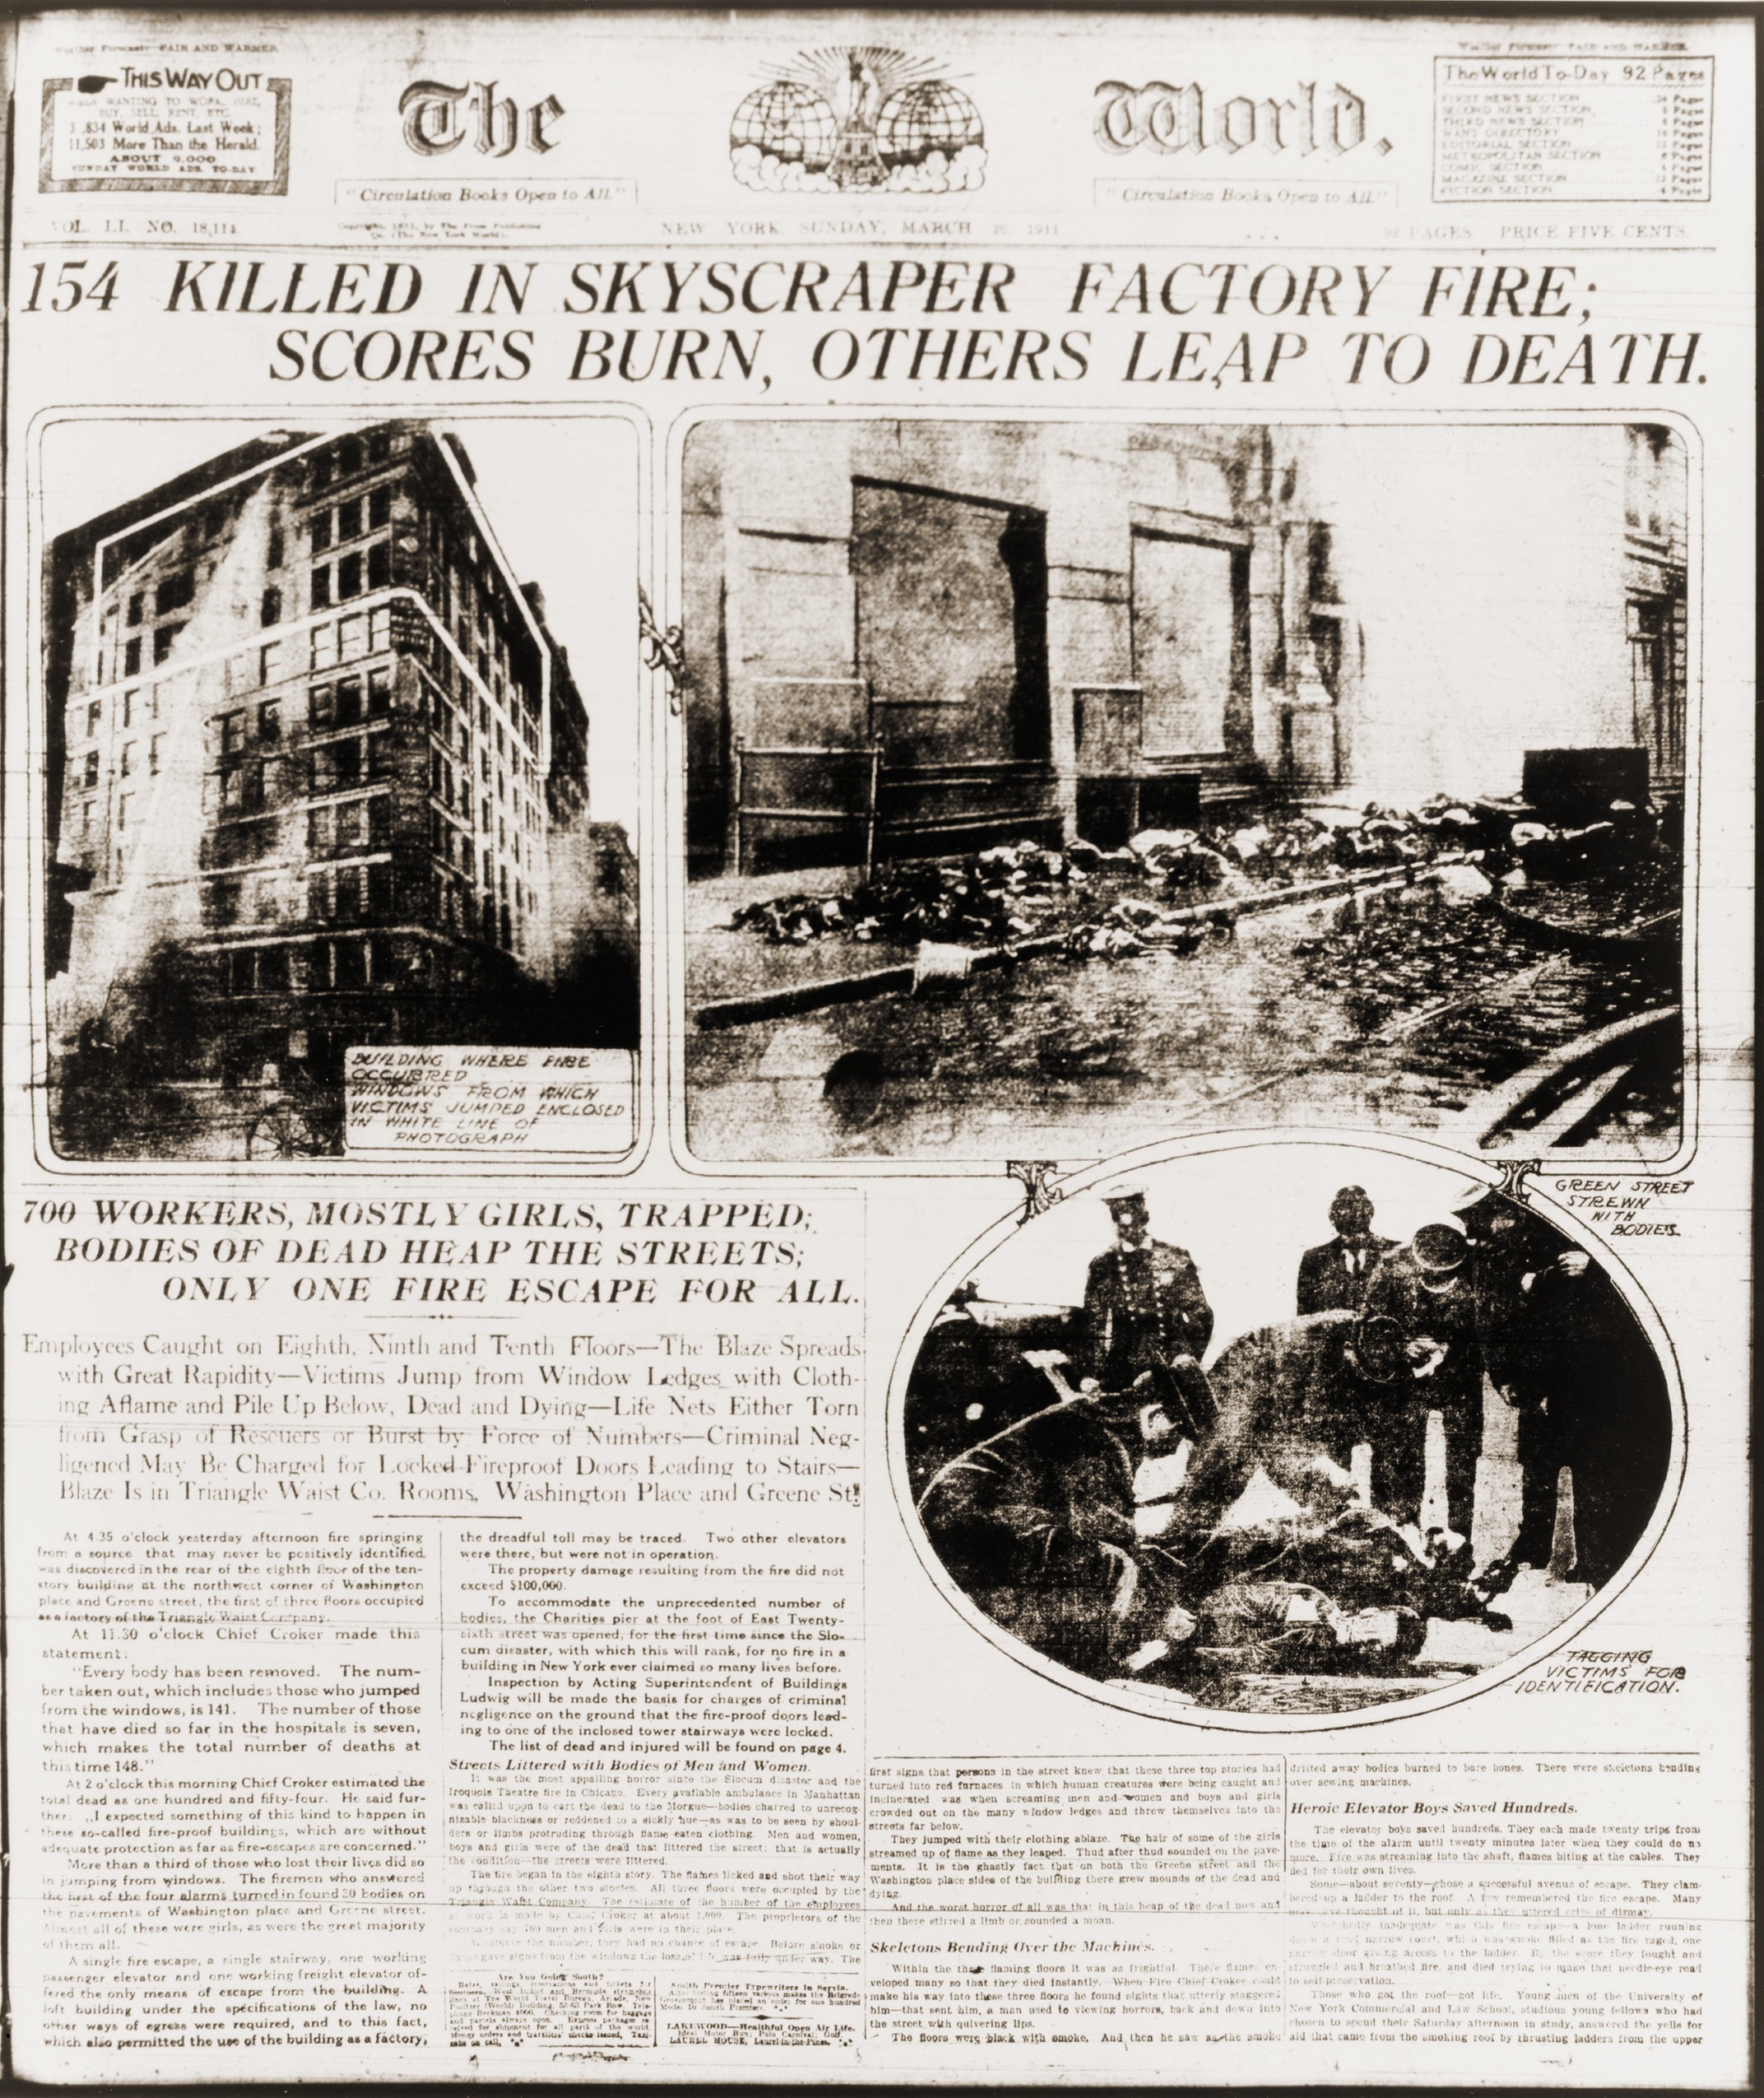 Lessons from the Triangle Shirtwaist Factory fire